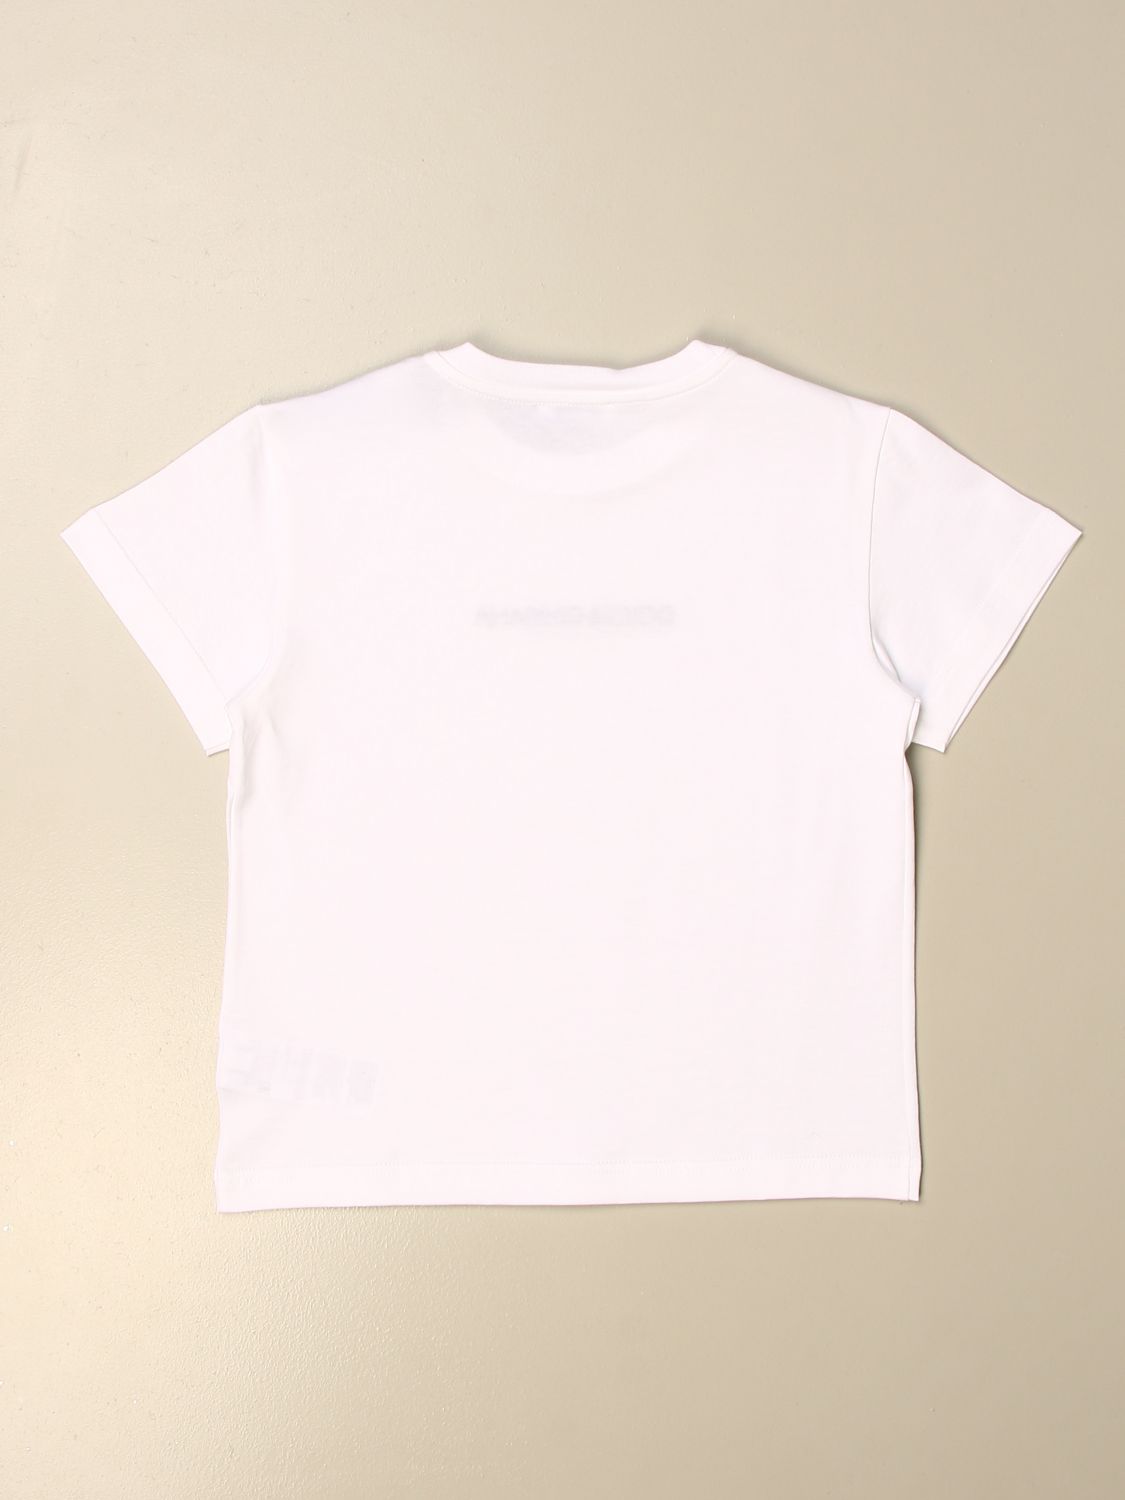 Dolce & Gabbana Outlet: cotton t-shirt with logo - White | Dolce ...